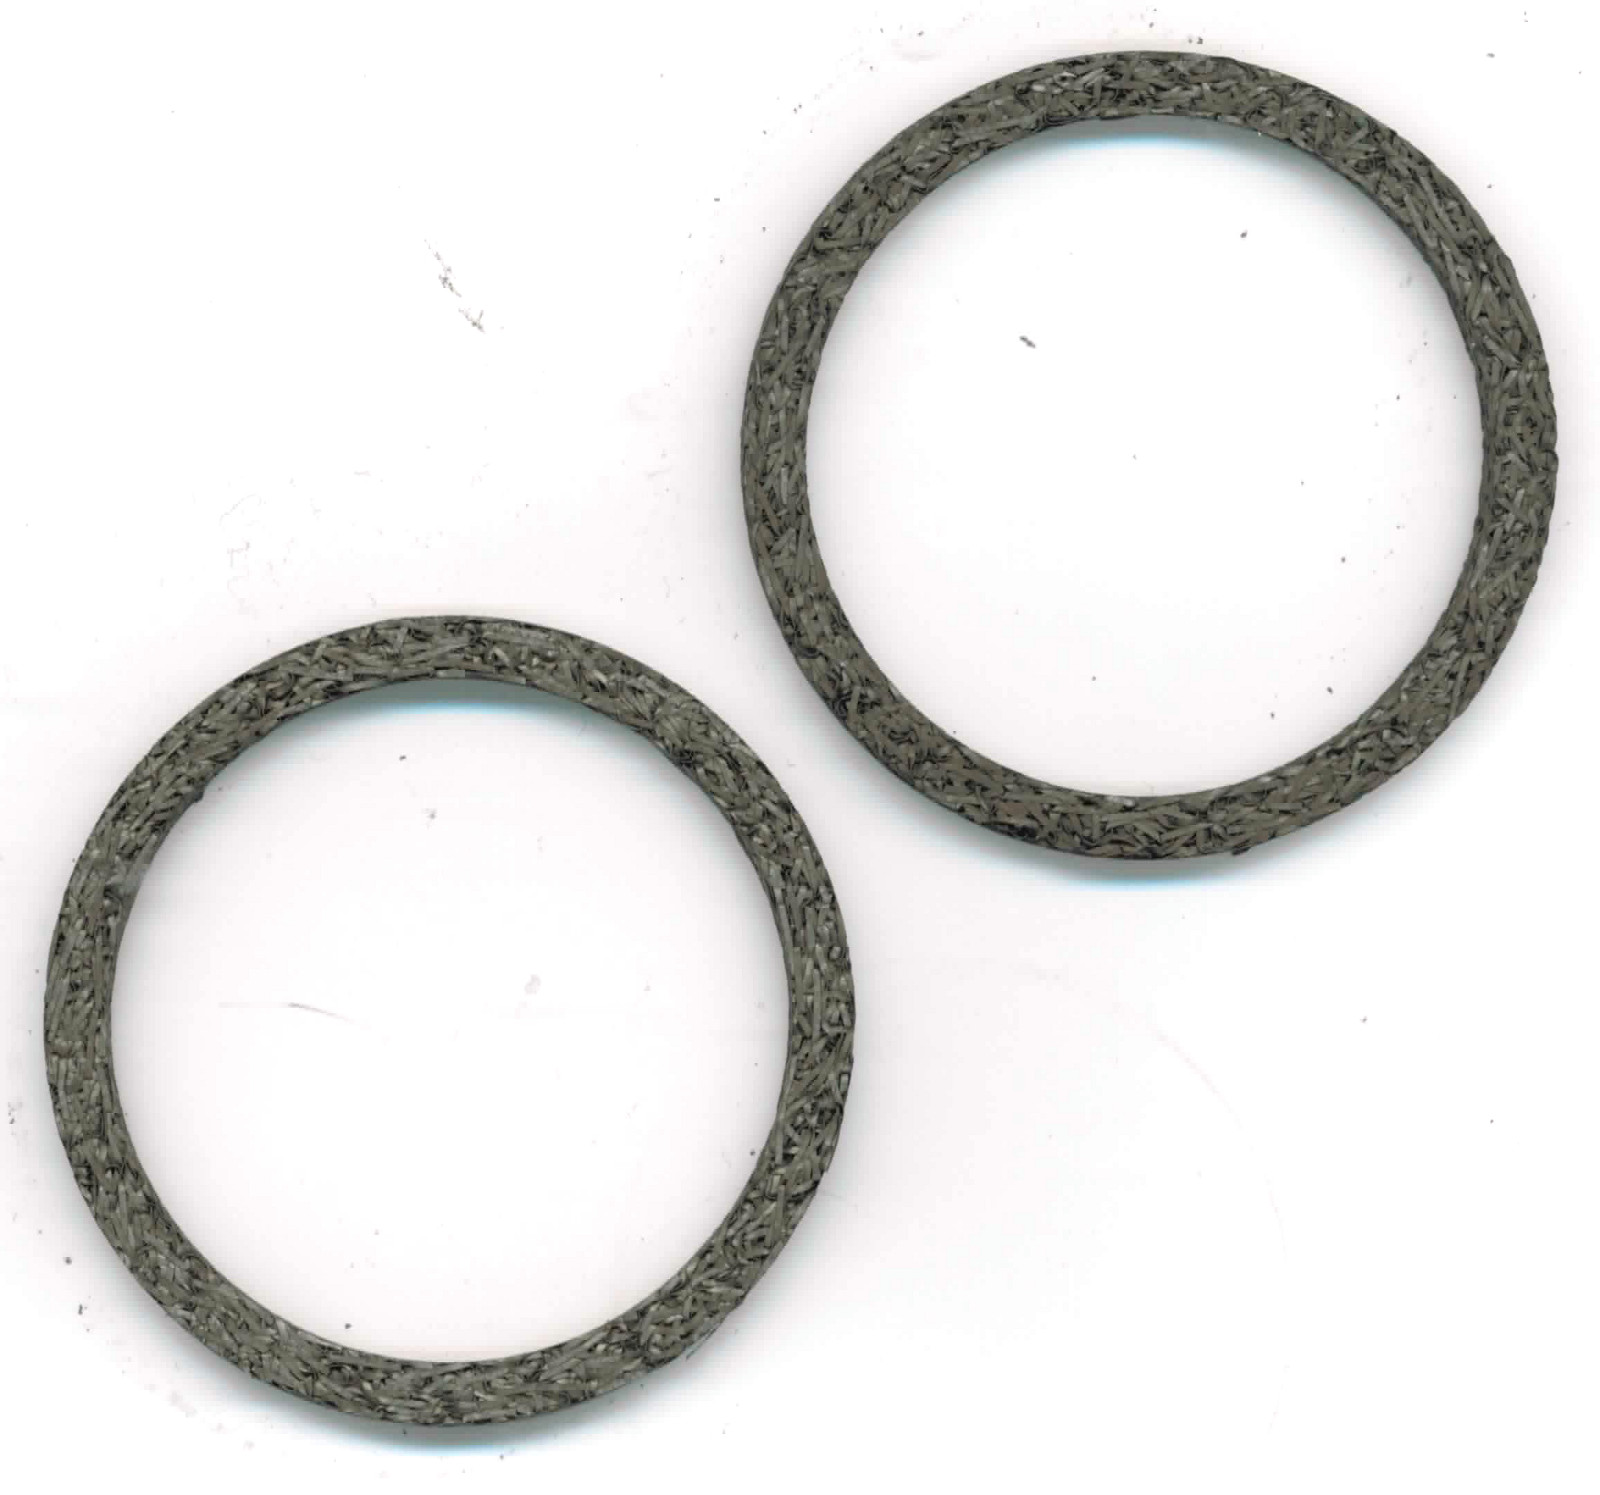 Exhaust Port Gaskets Replaces 65324-83 - Harley 84-18 Big Twin & 86-18 XL - Click Image to Close